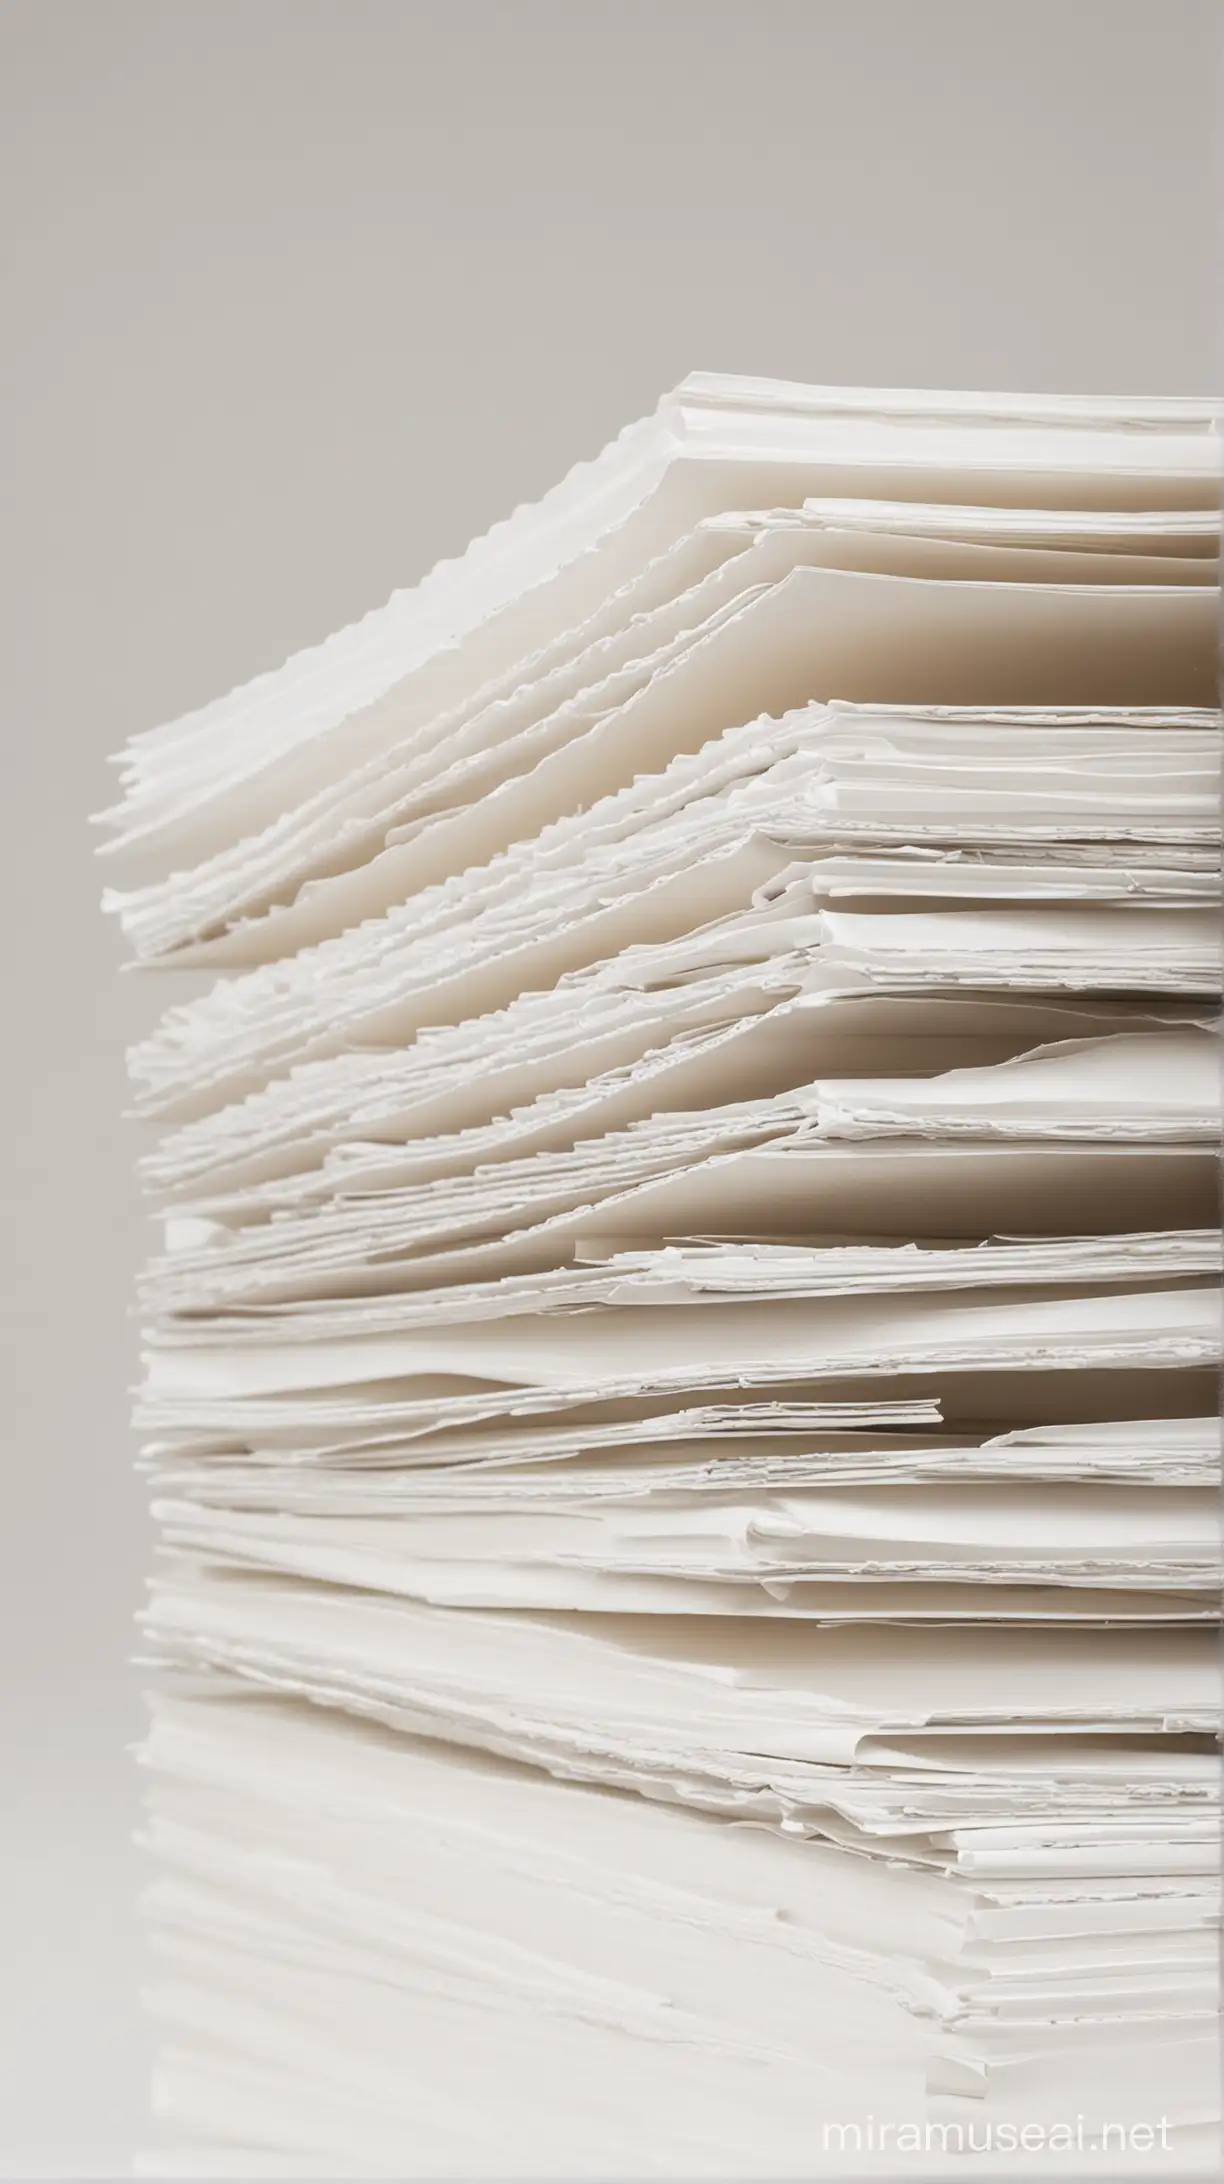 Stack of White Binders on Pale Background